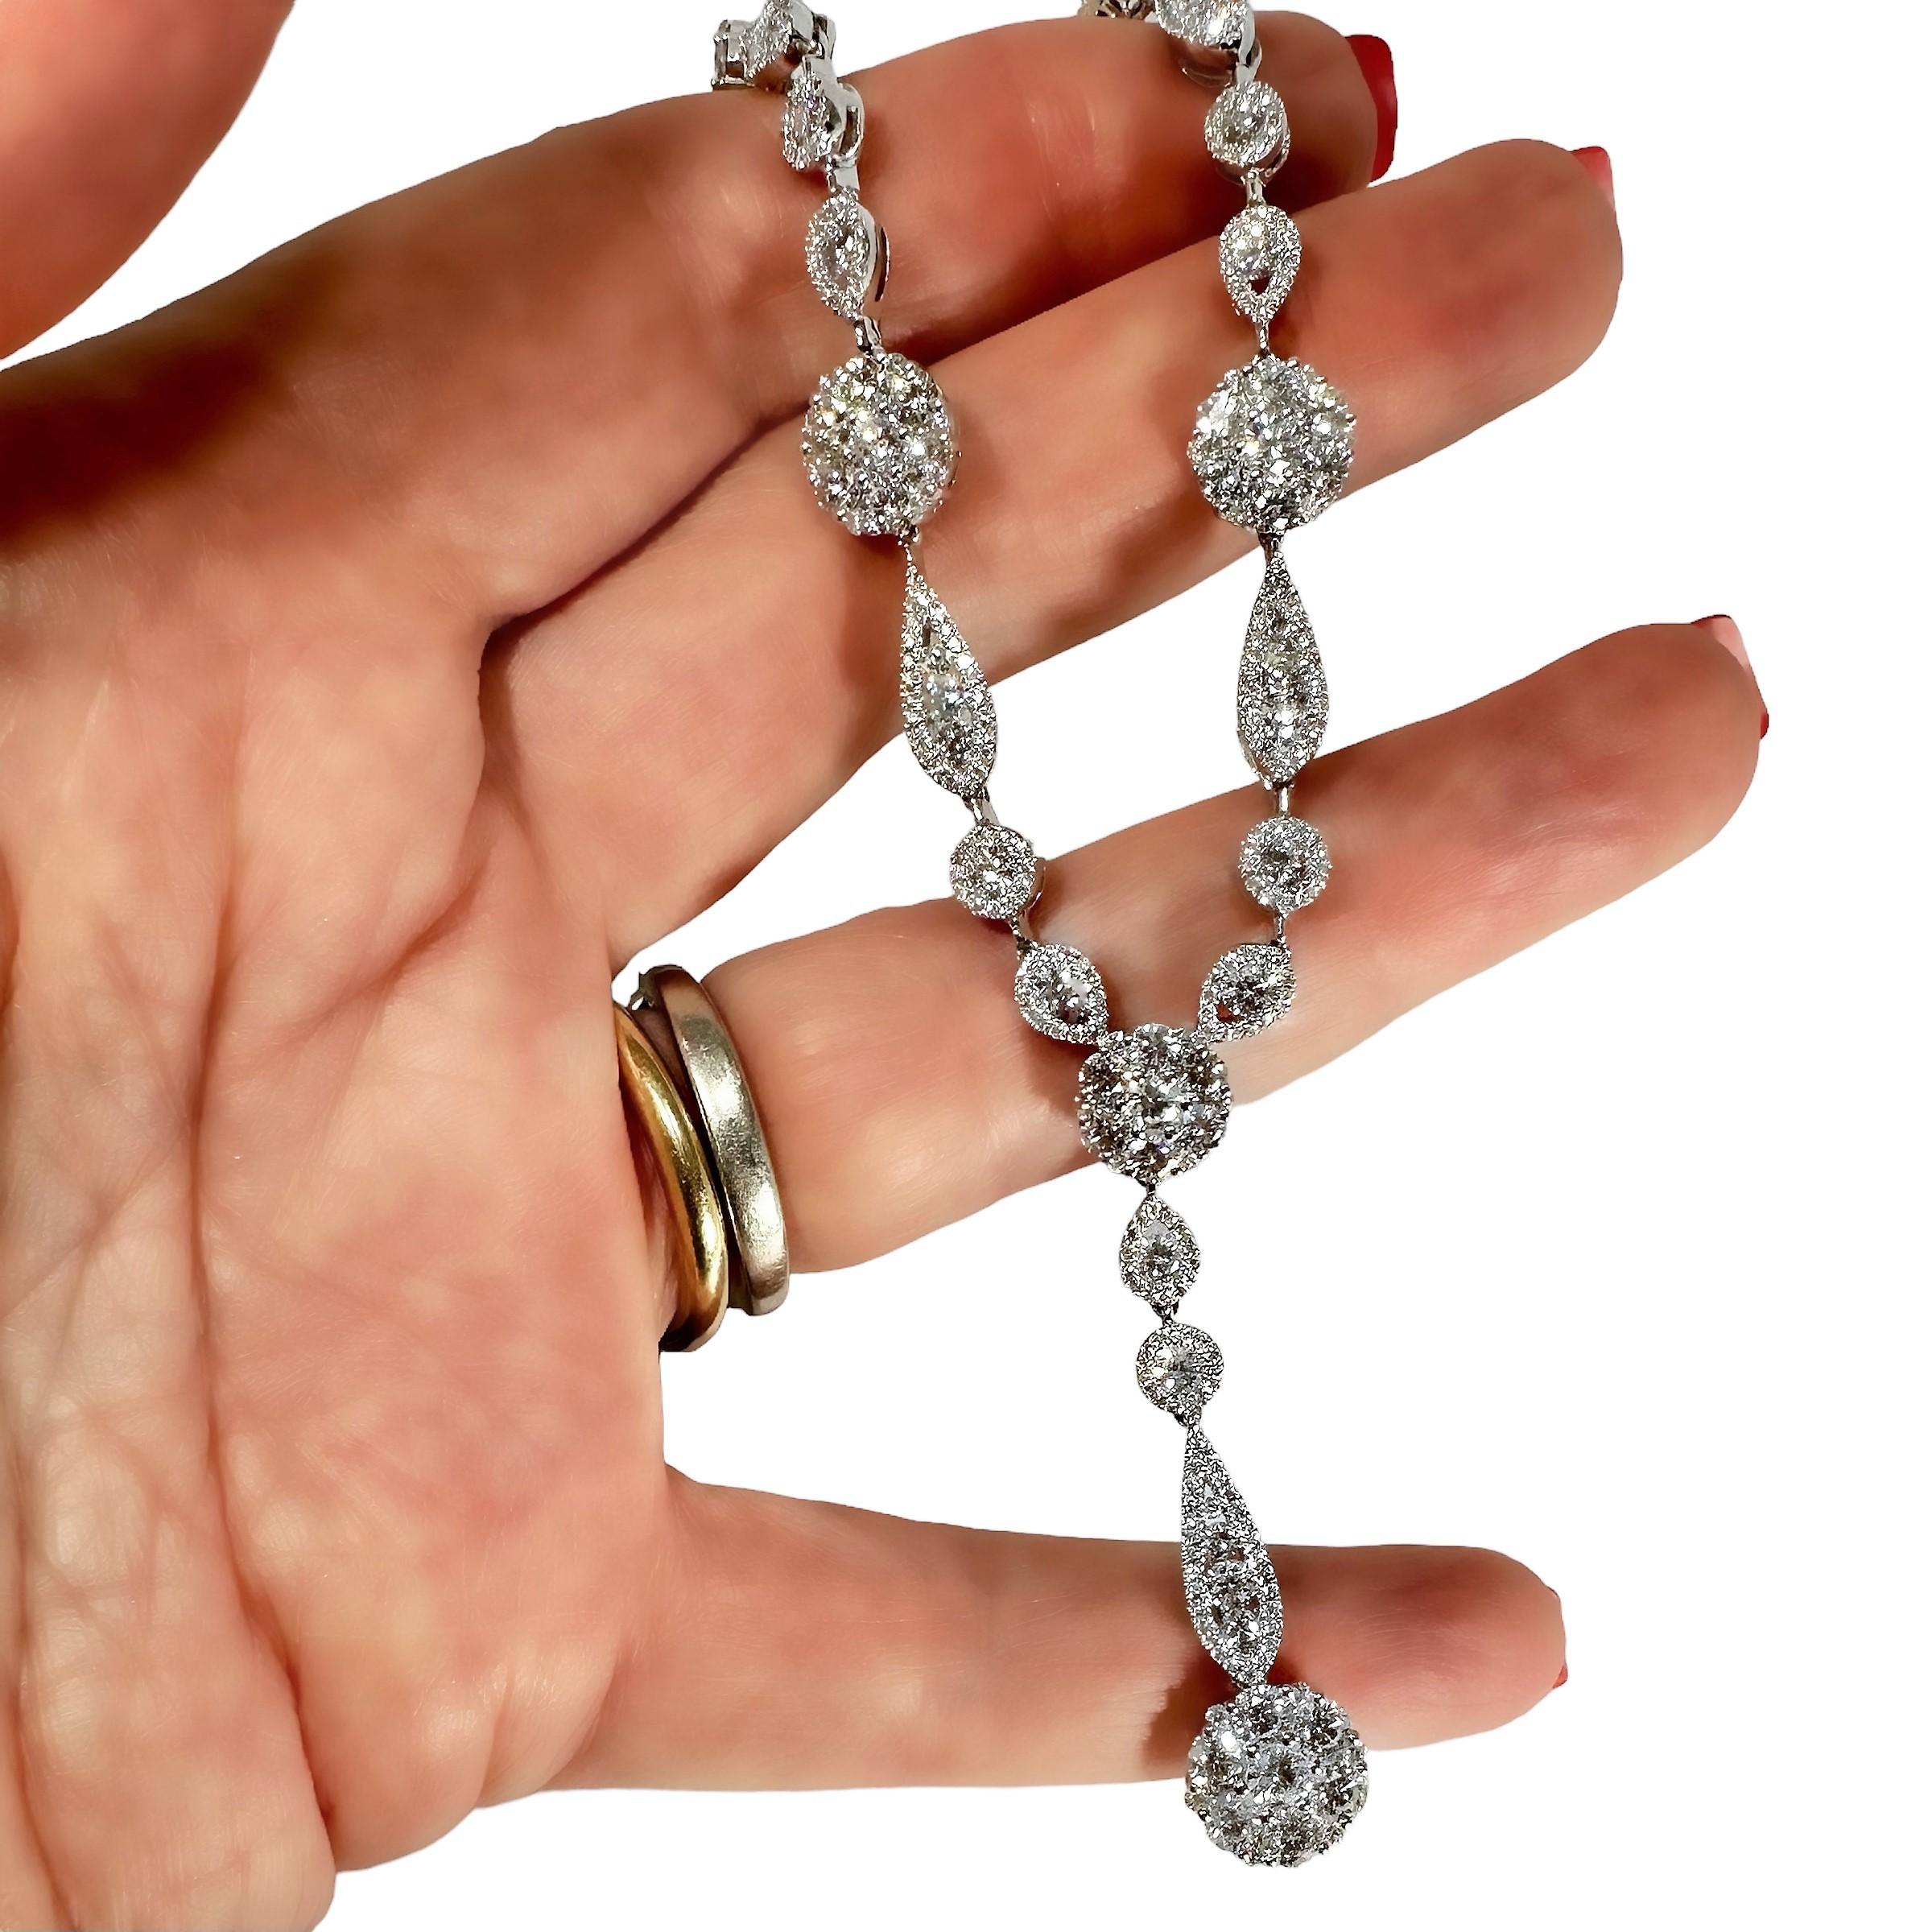 Scintillating Modern 18K White Gold Diamond Fashion Necklace with Drop In Good Condition For Sale In Palm Beach, FL